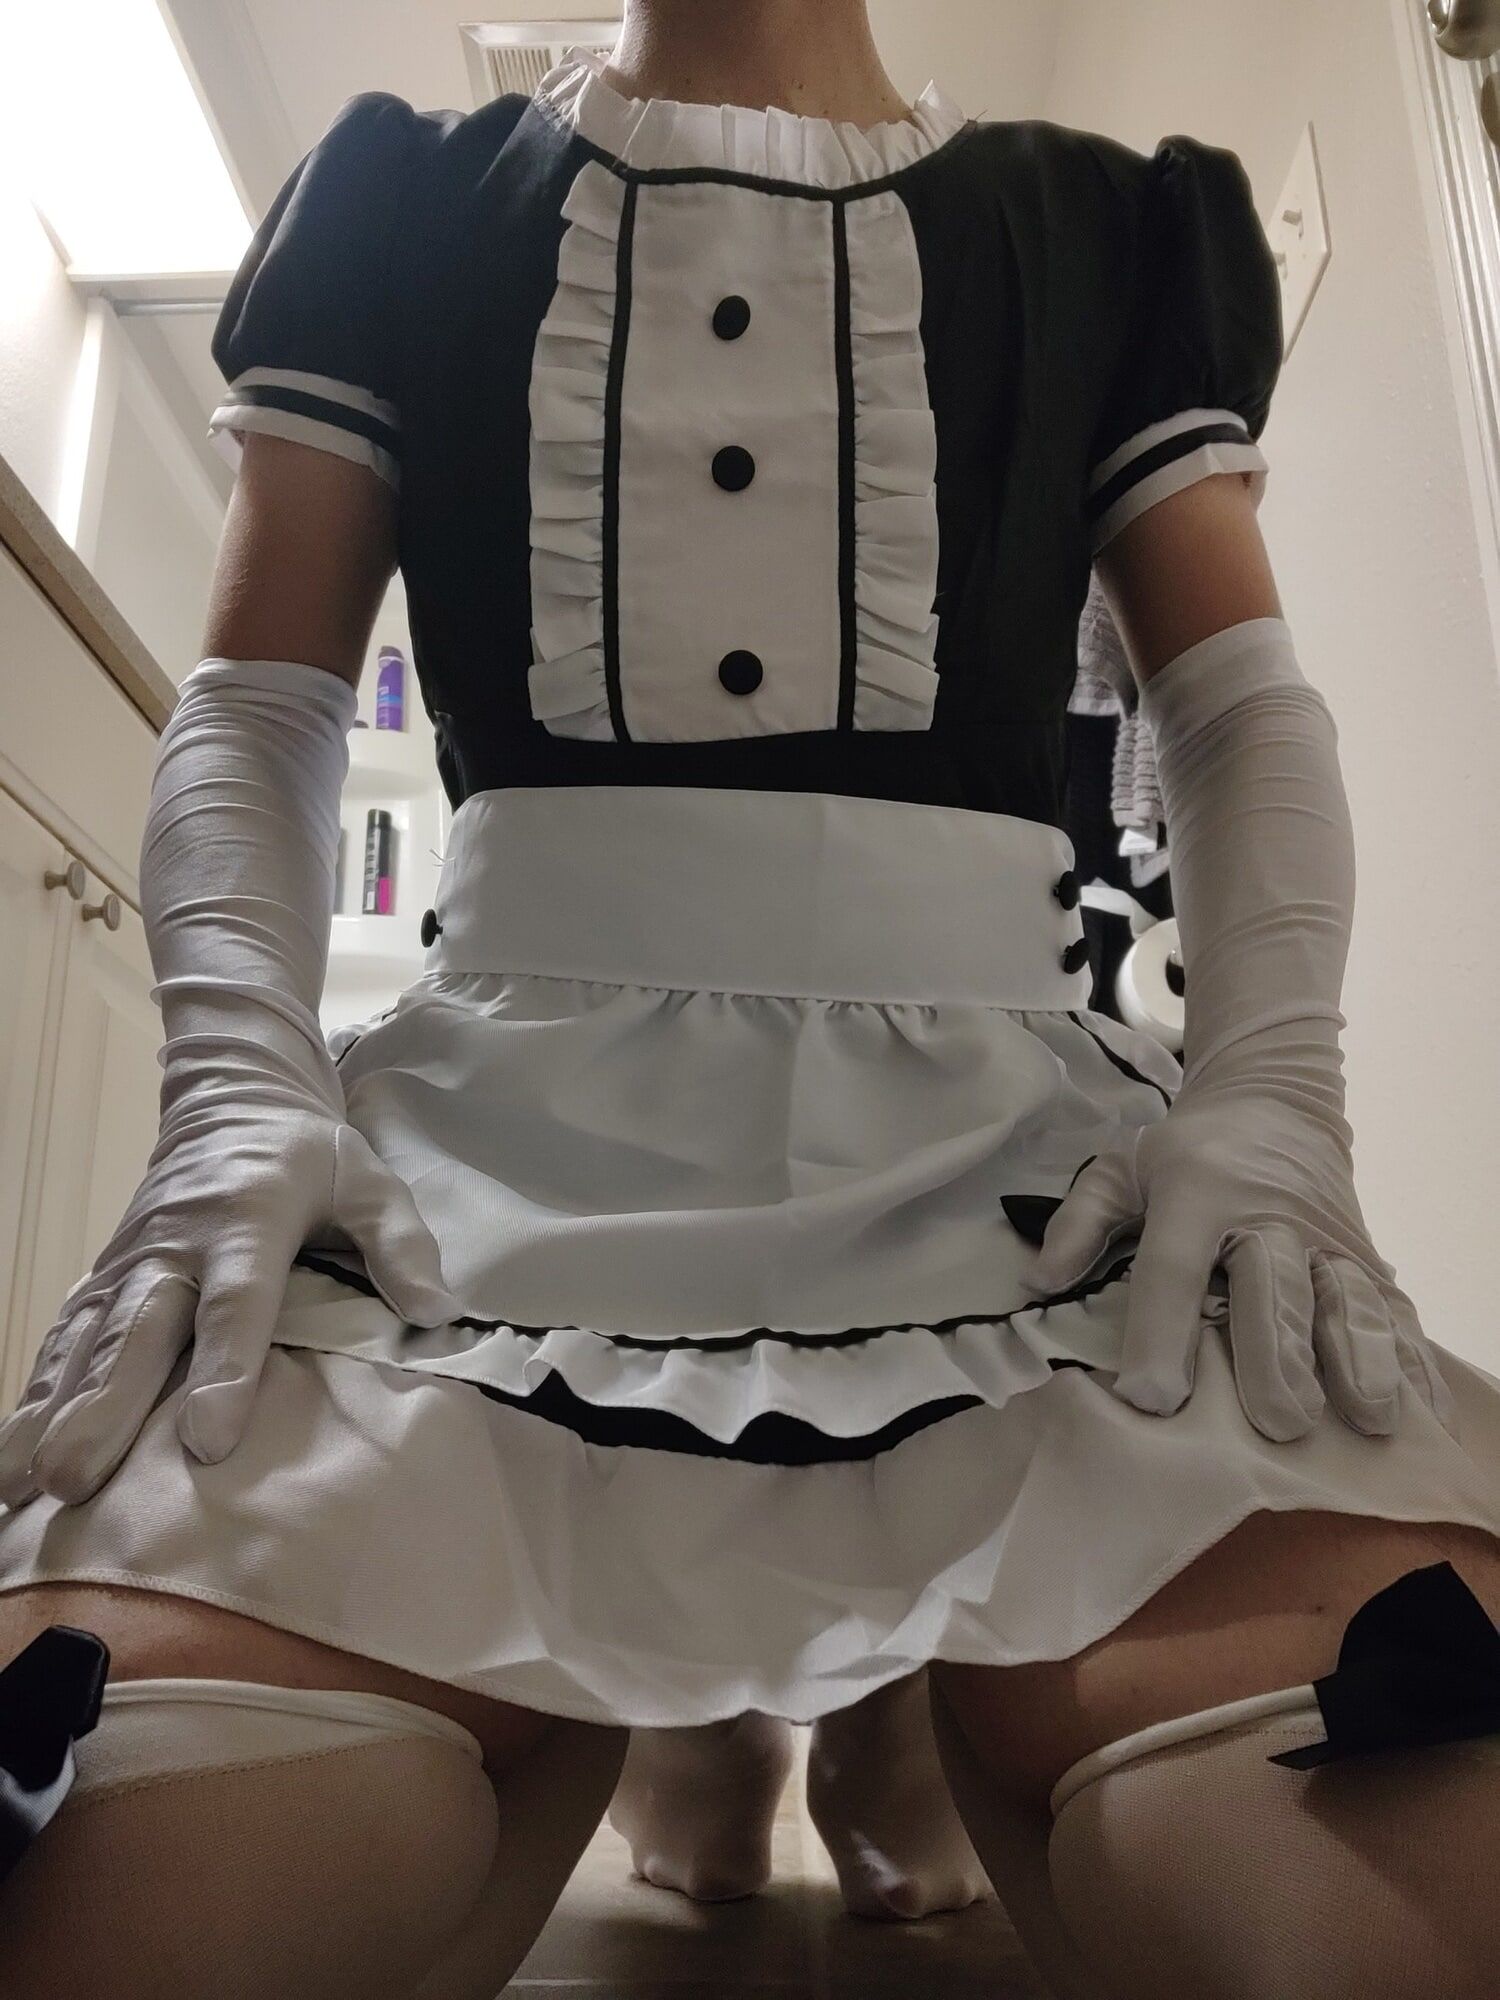 New maid outfit #2